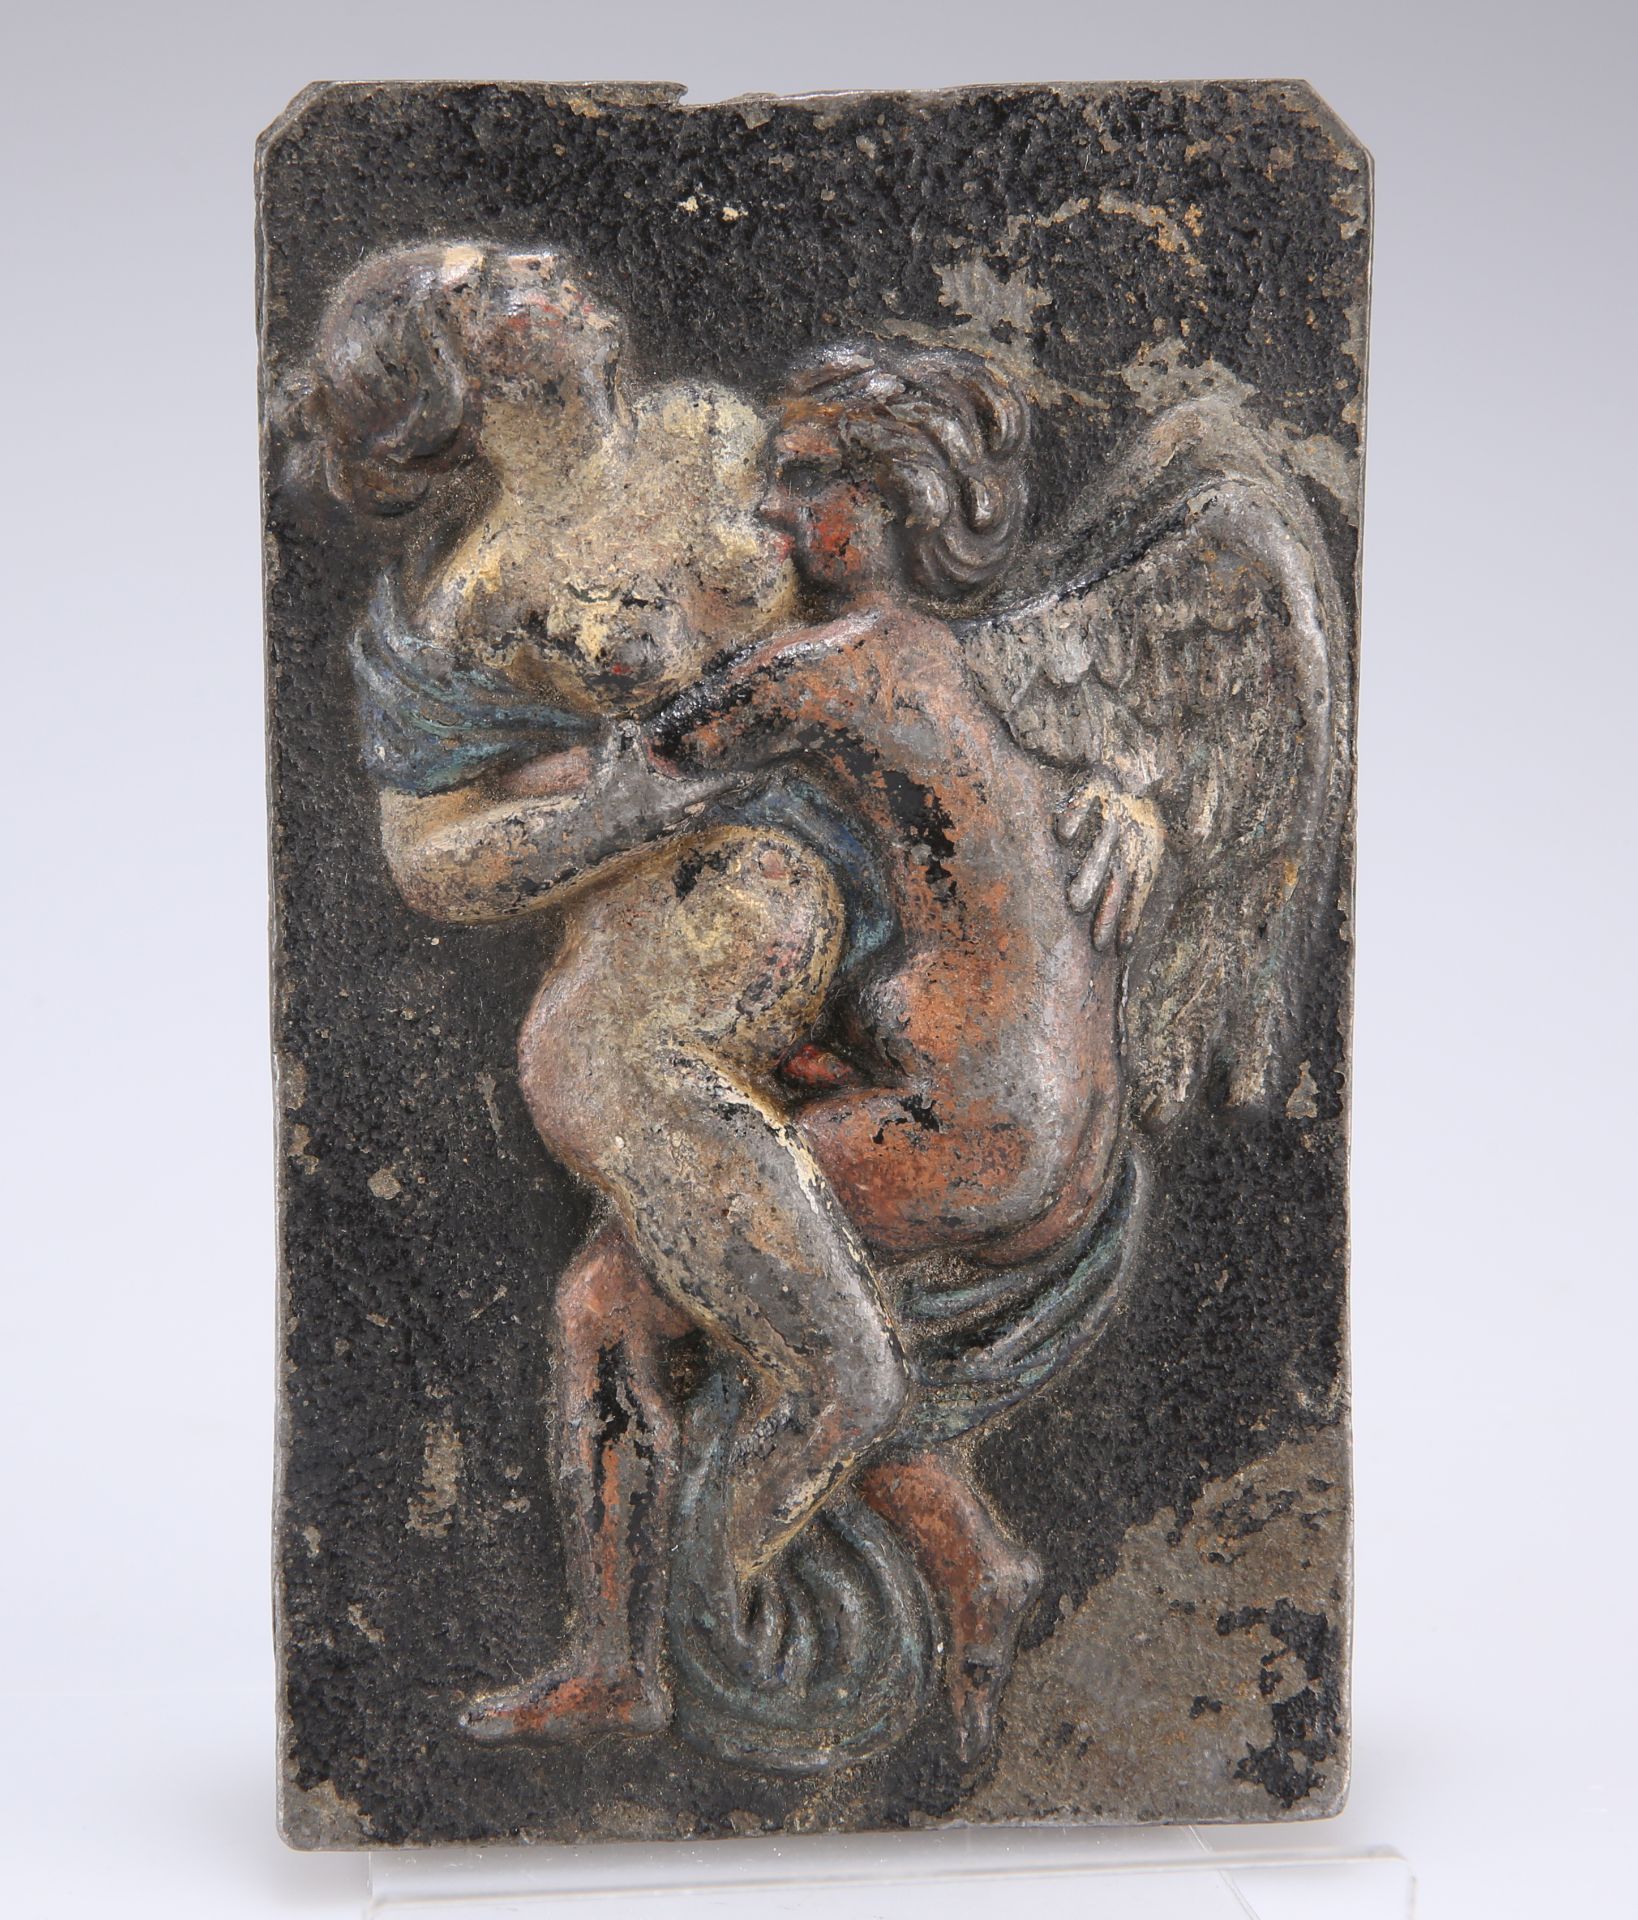 A CLASSICAL COLD-PAINTED BRONZE PLAQUE, C.18TH CENTURY, featuring two figures in an erotic pose.